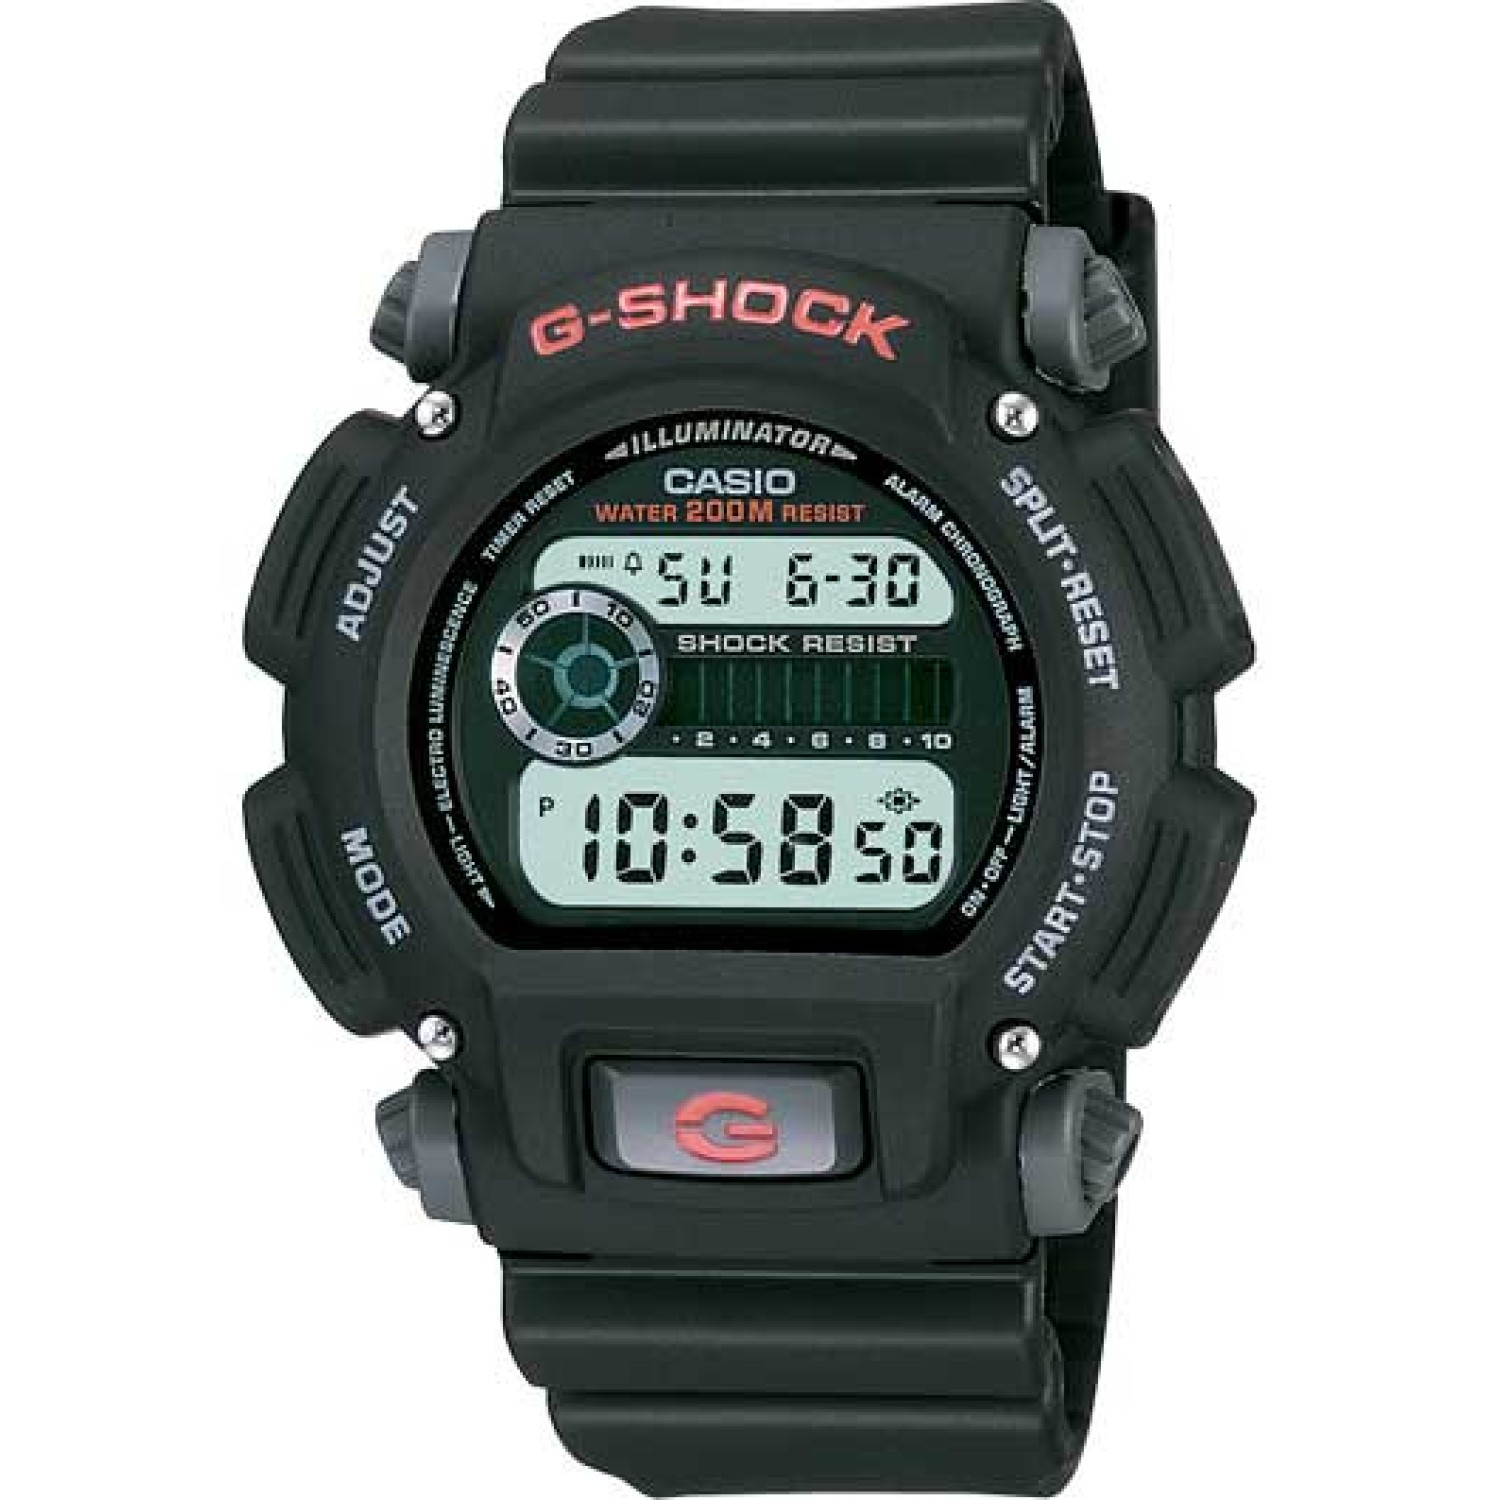 DW9052-1V G-Shock Countdown Alarm Watch. With full 200 metres  water resistantance, Shock Resistant, 24Hr stopwatch and countdown timer, standard issue never looked this good. Black resin band digital watch with black face. Available online or in store at